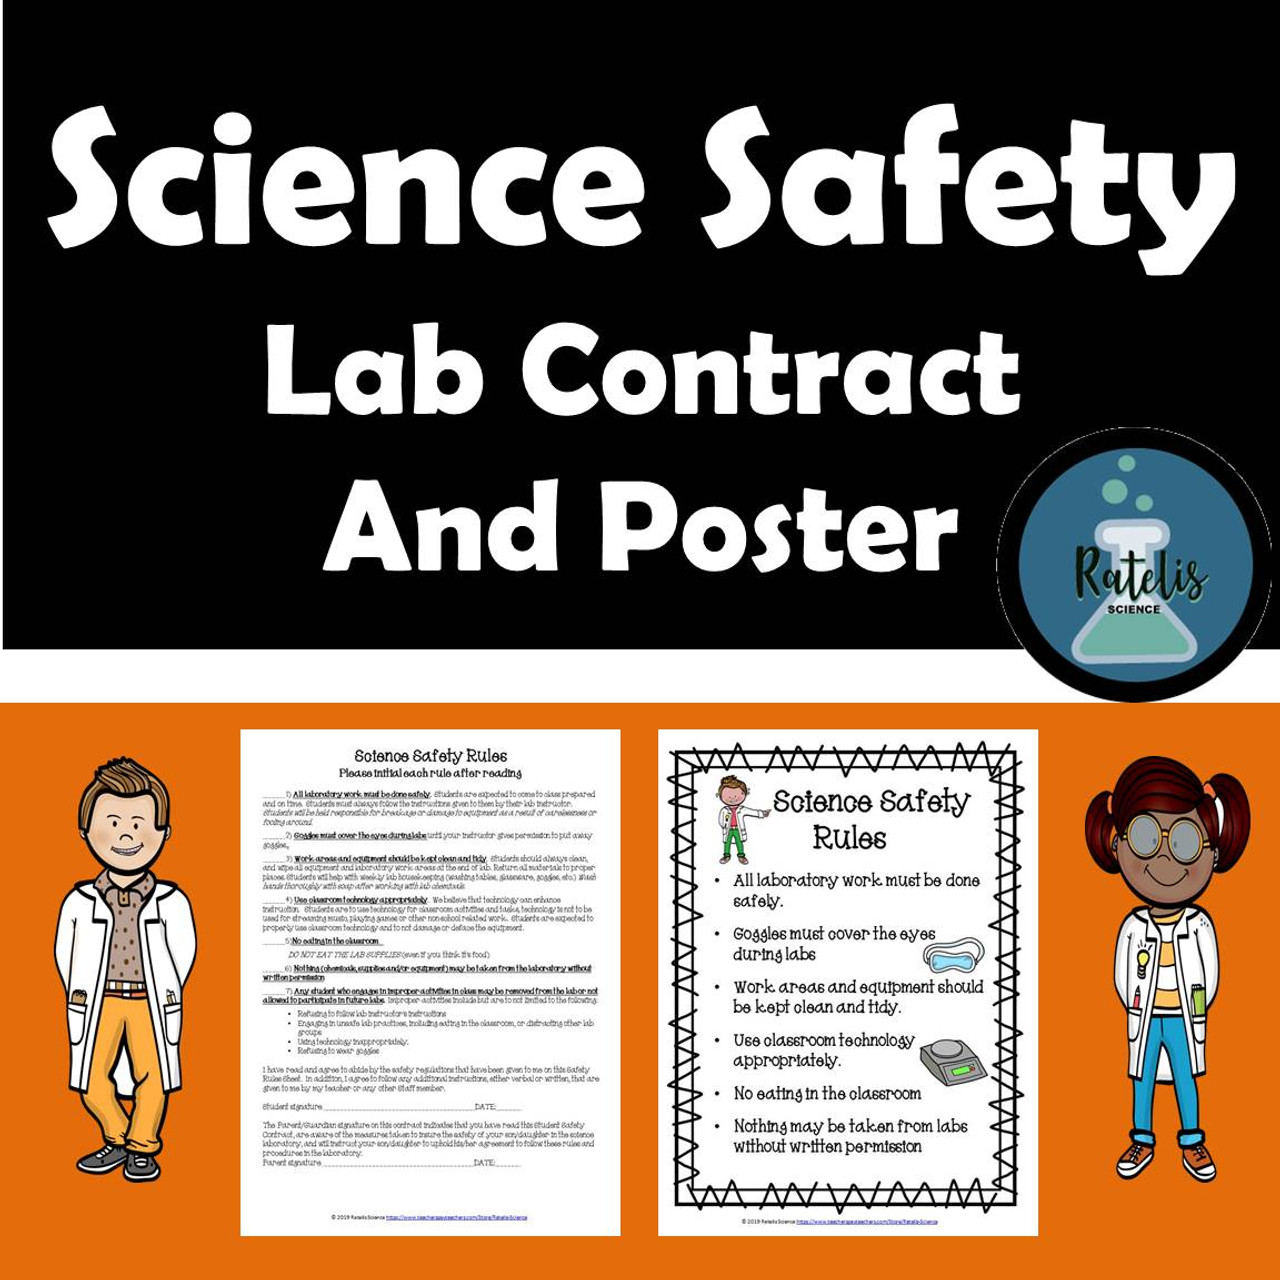 science lab safety rules middle school